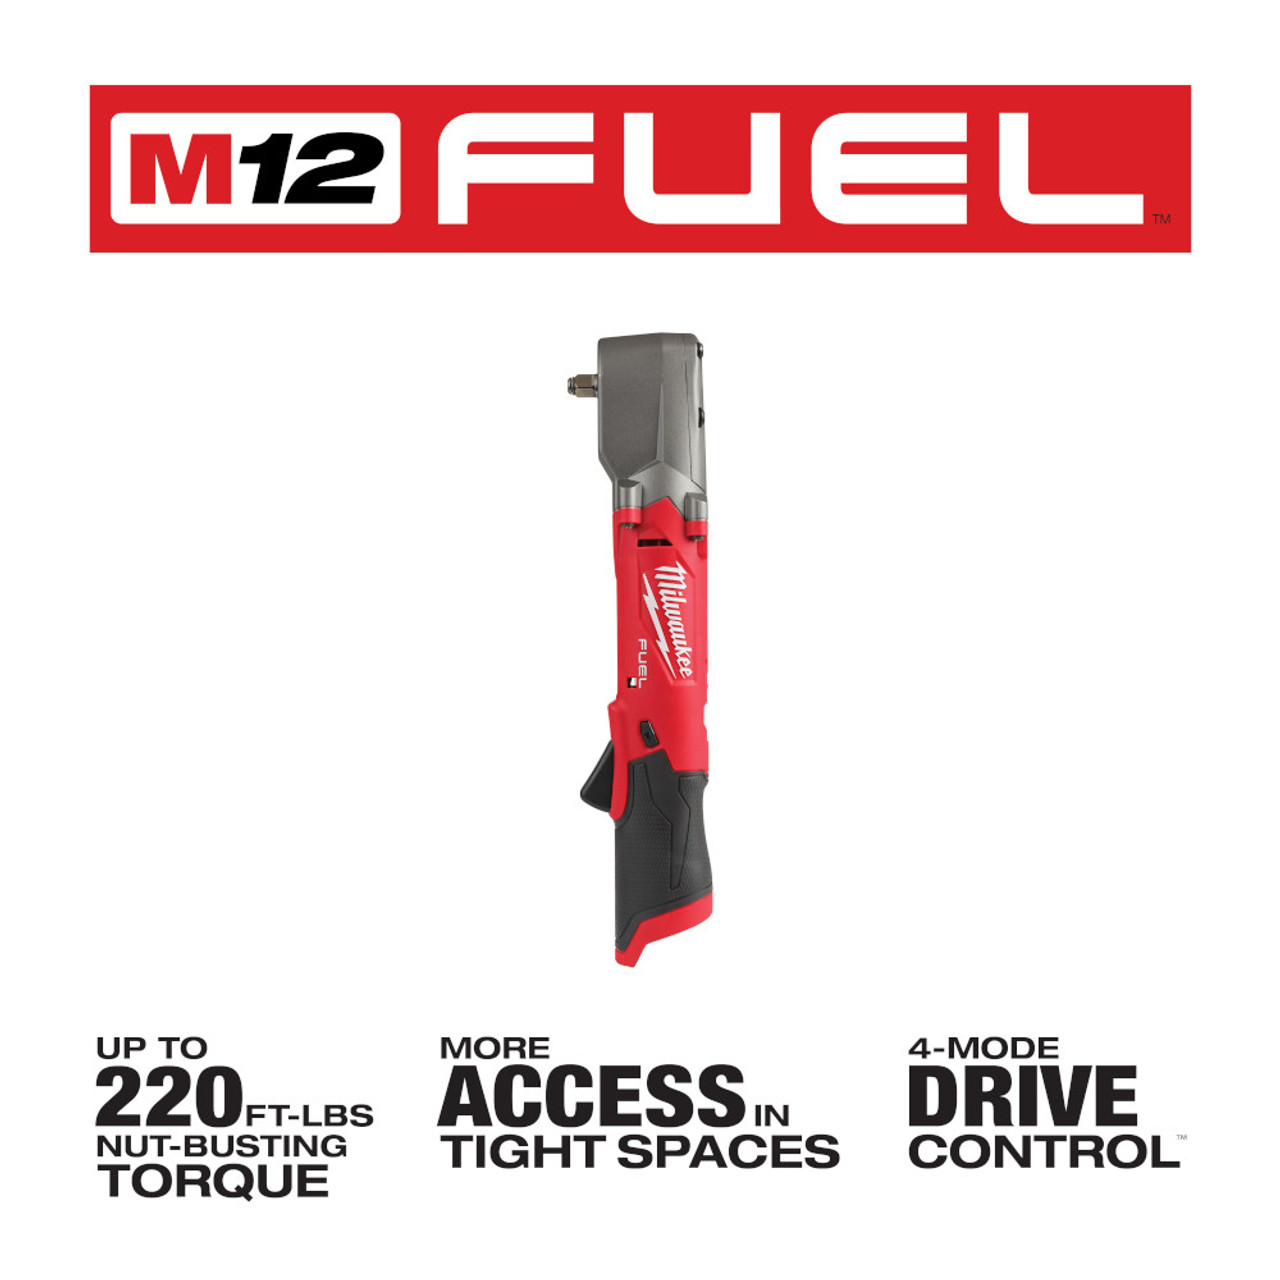 Milwaukee M12 FUEL 1/2 Right AngIe Impact Wrench 220 ft-lbs Bare Tool  #2565-20 - Helia Beer Co